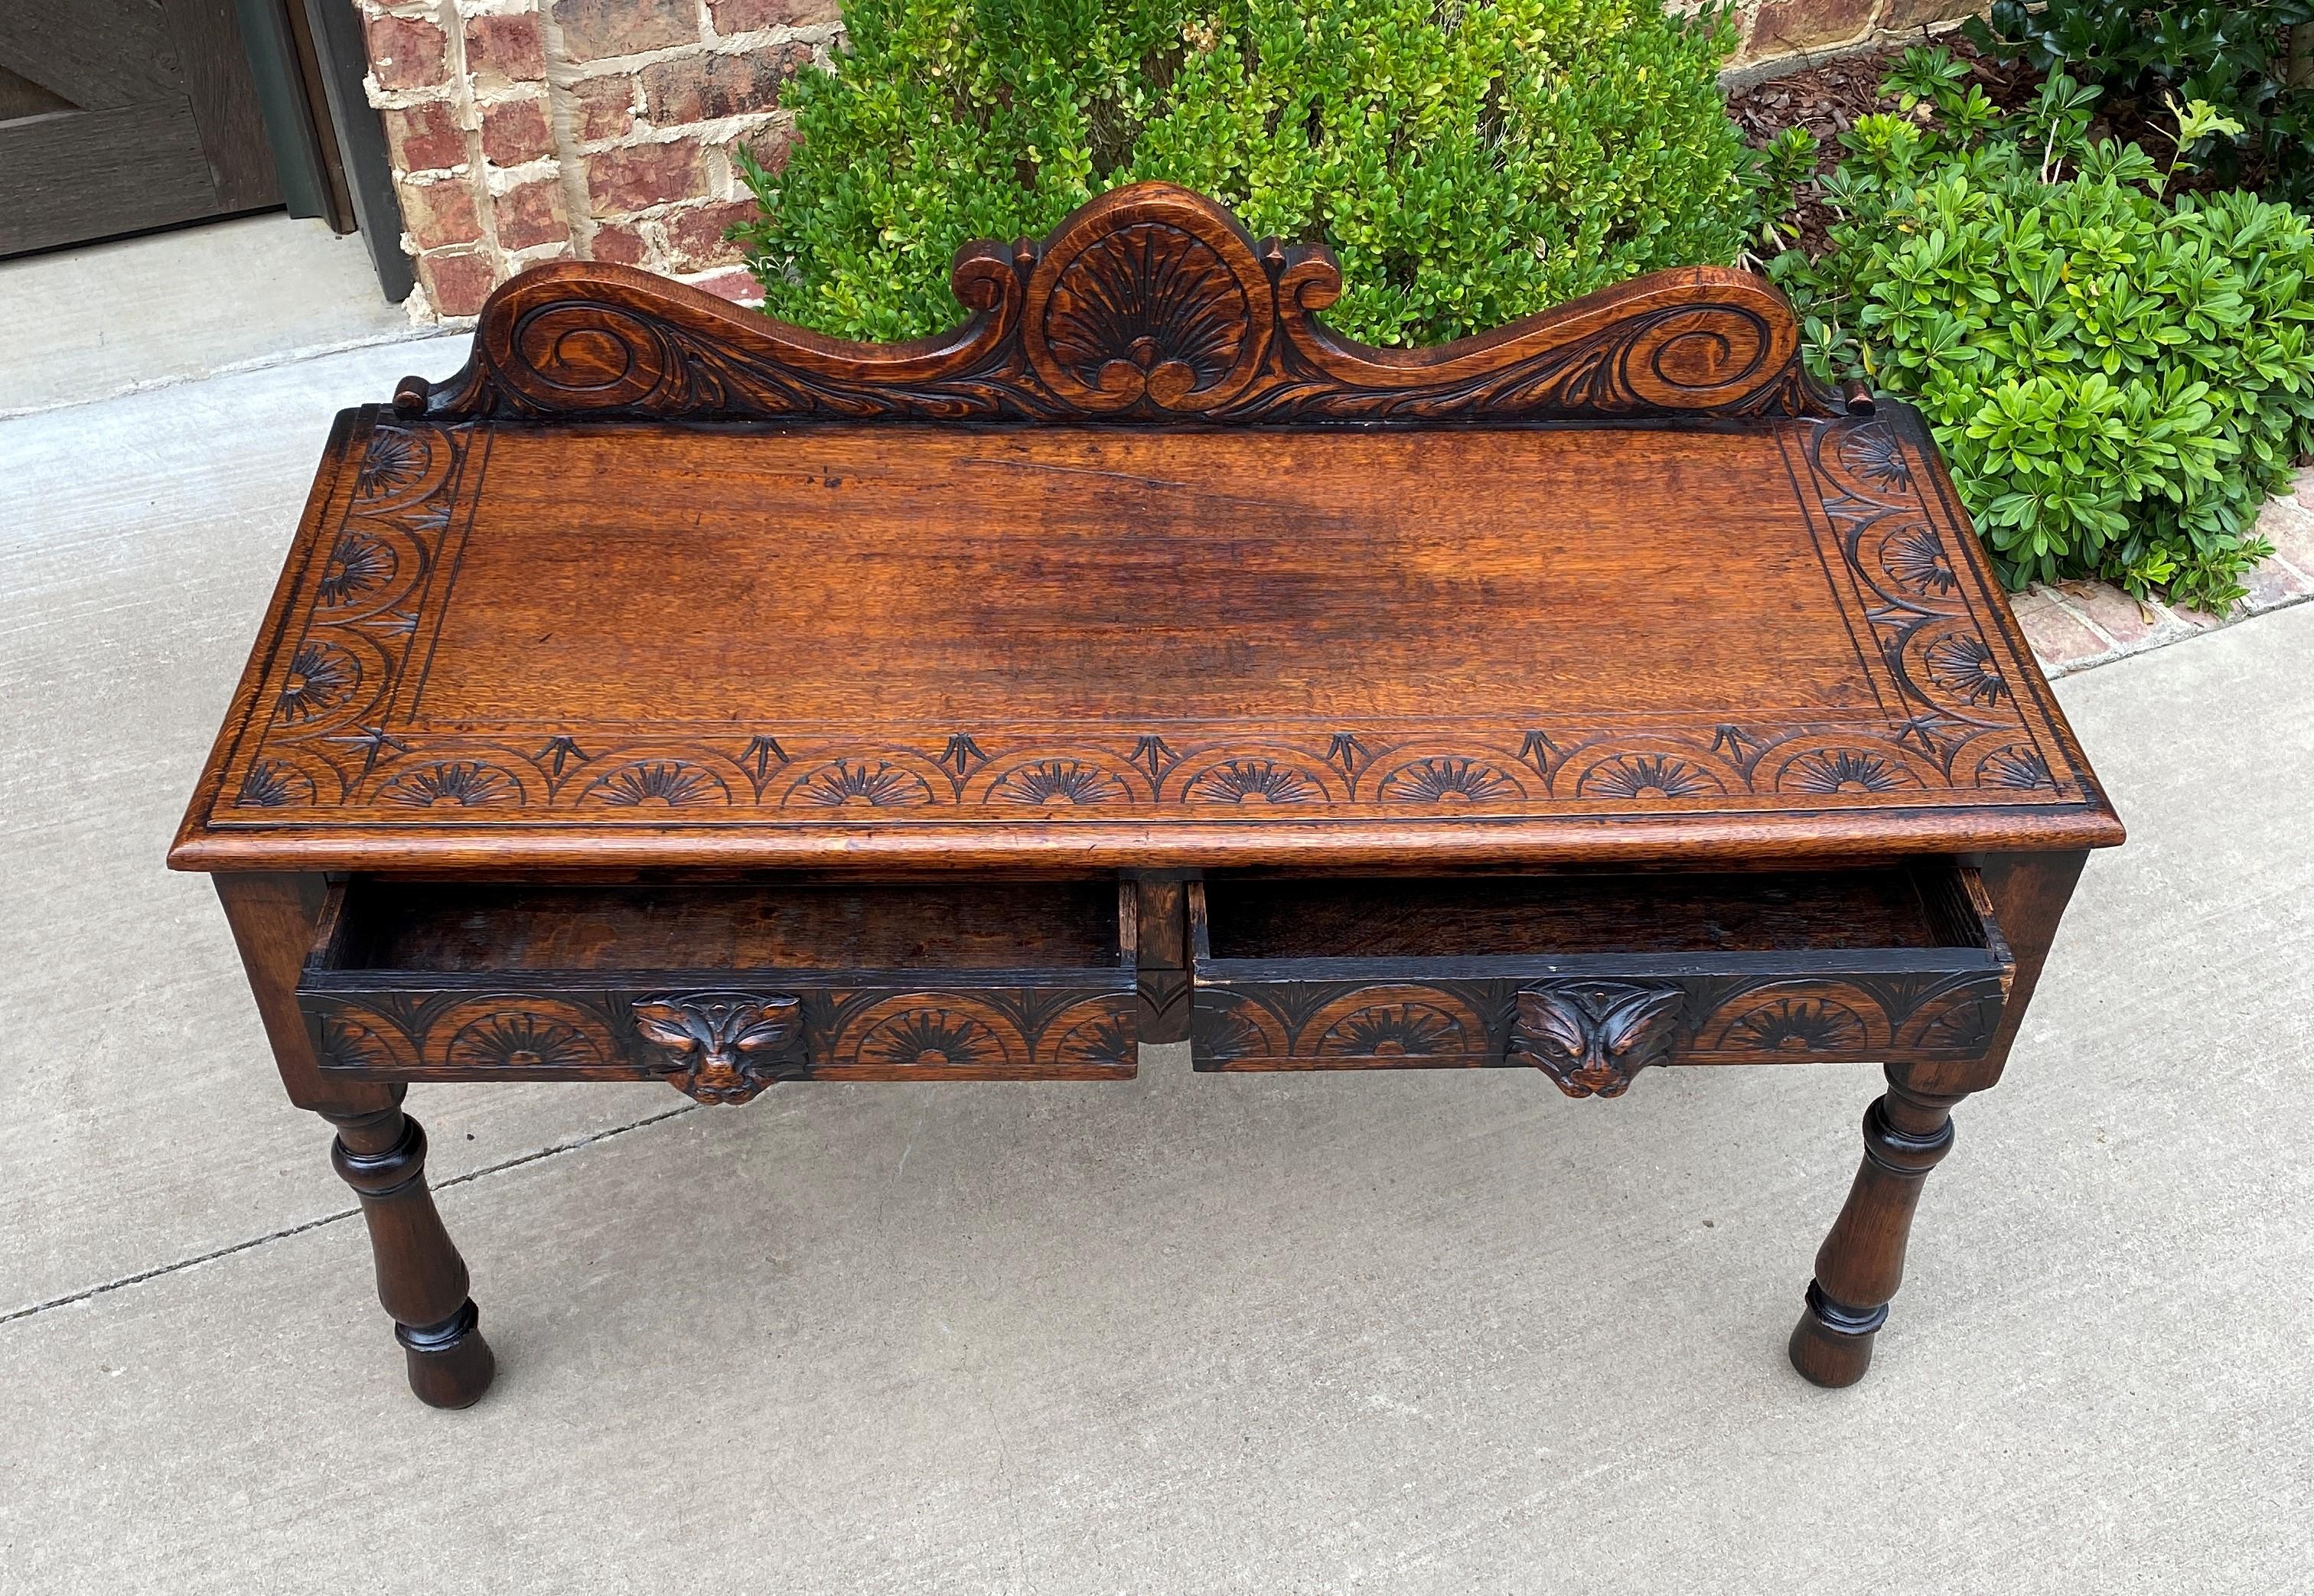 Antique English Window Seat Bed Bench Gothic Revival Carved Oak 2 Drawers c.1900 For Sale 2